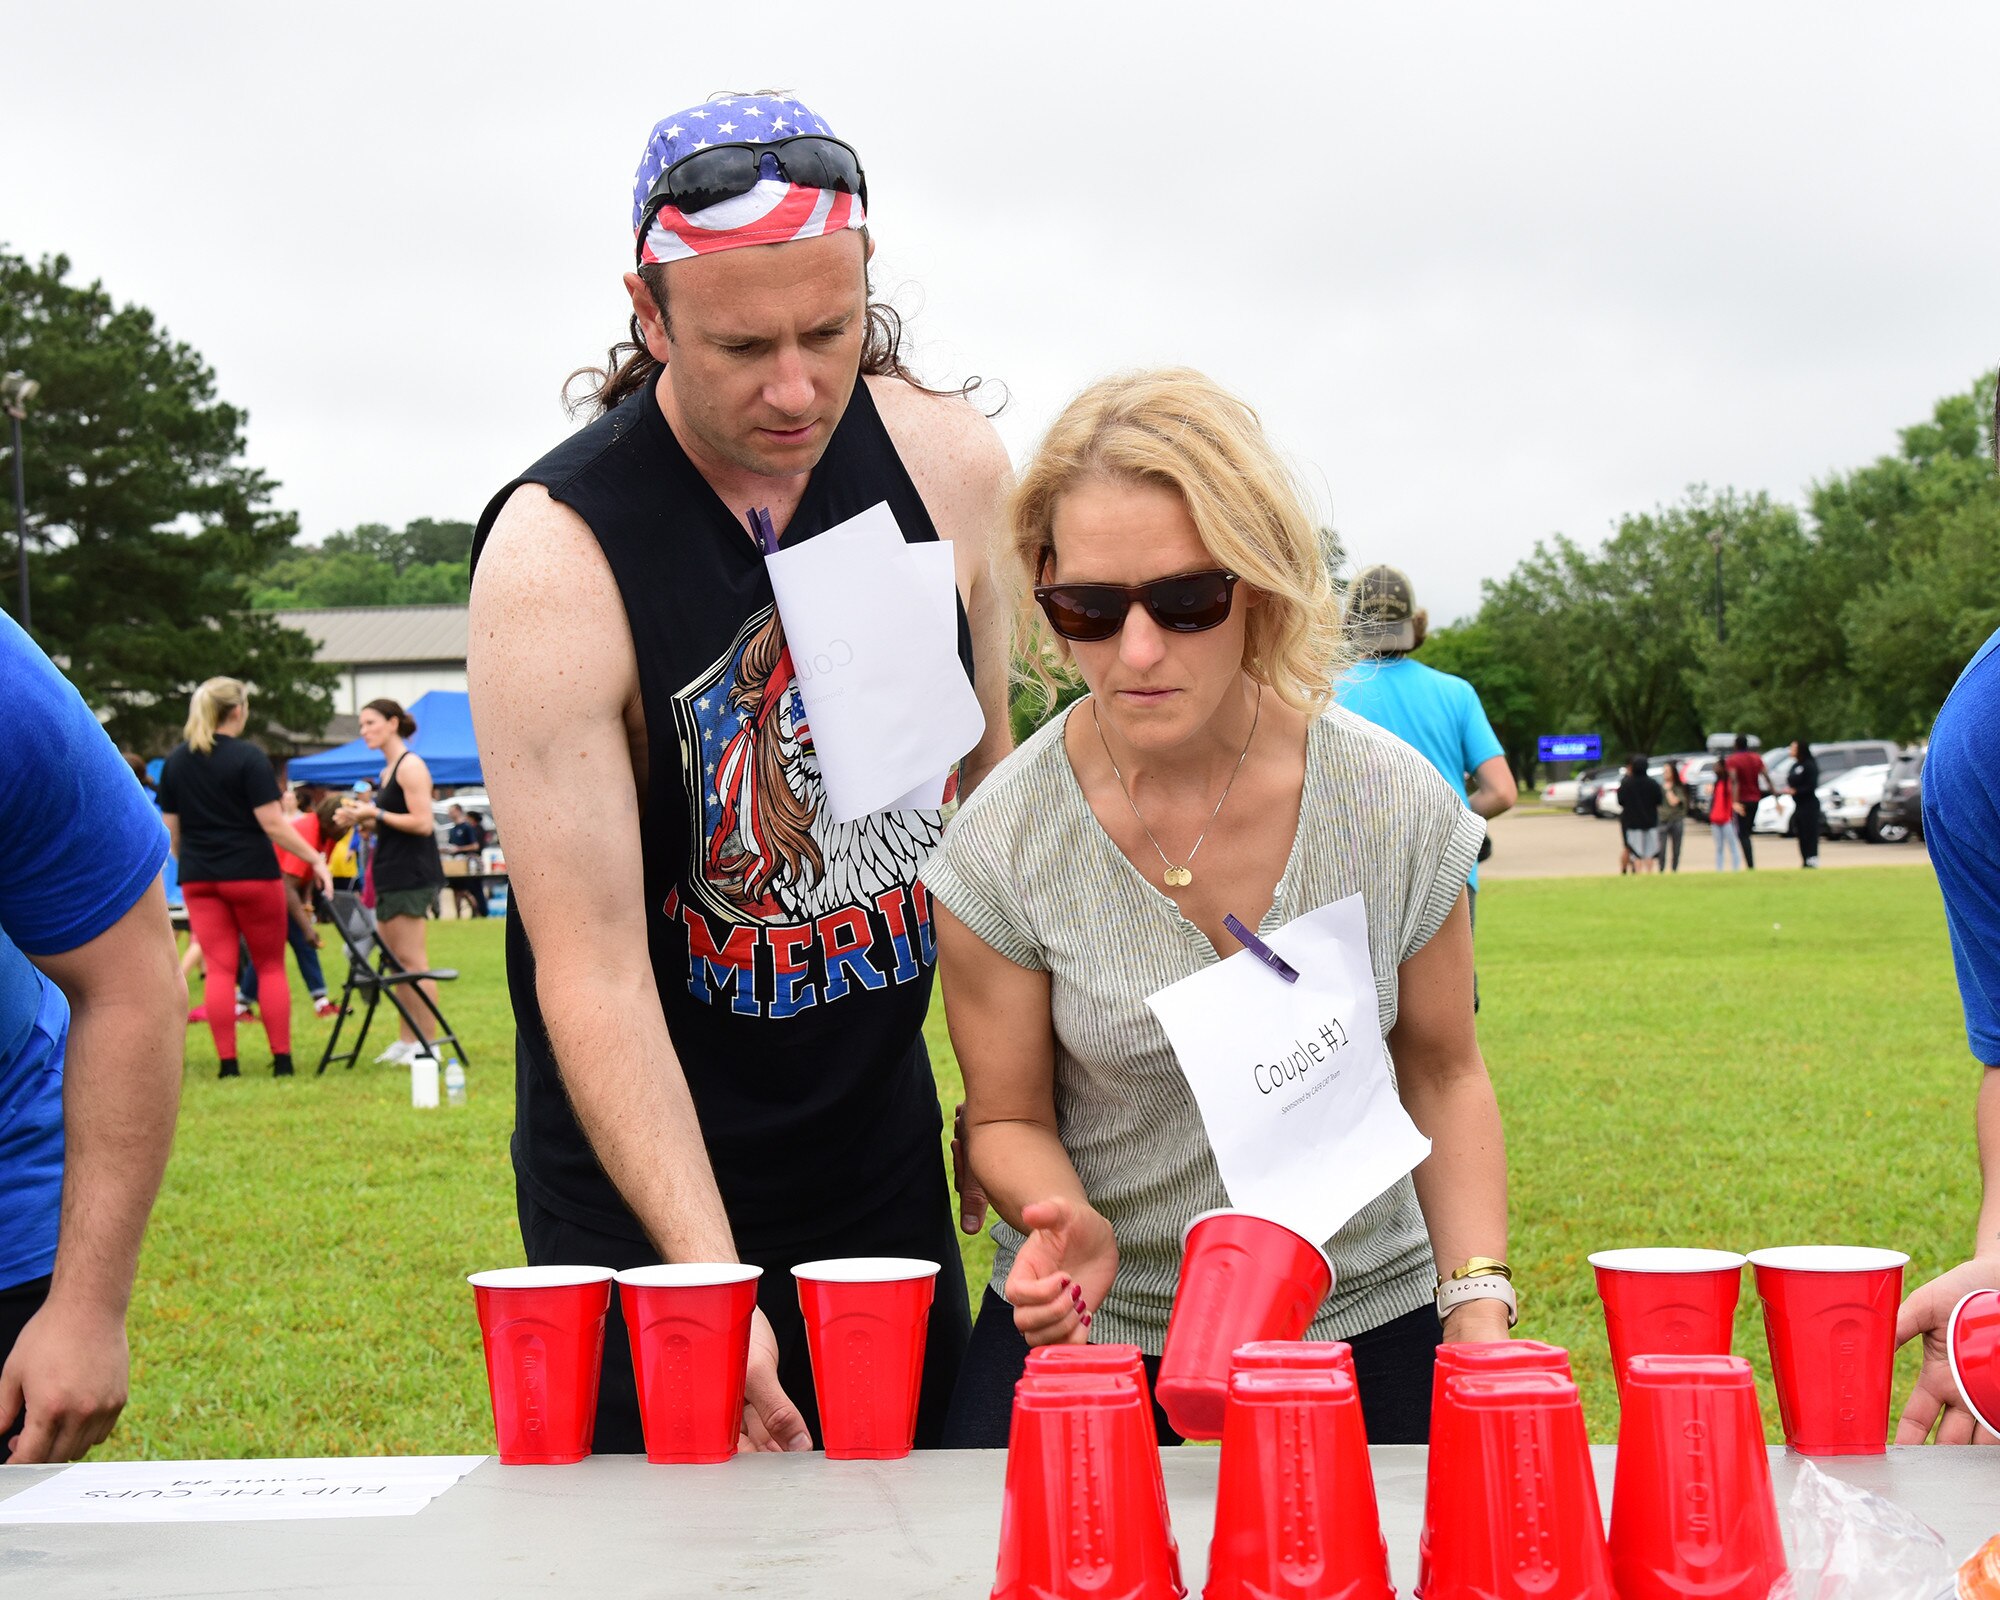 Military spouses participate in various challenges during the Military Spouse Appreciation Day barbeque May 10, 2019, on Columbus Air Force Base, Miss. Similar to the challenges in the international game show, Minute to Win It, spouse groups raced against each other in a competition to see who could complete the challenges in the shortest amount of time (U.S. Air Force photo by Melissa Doublin)